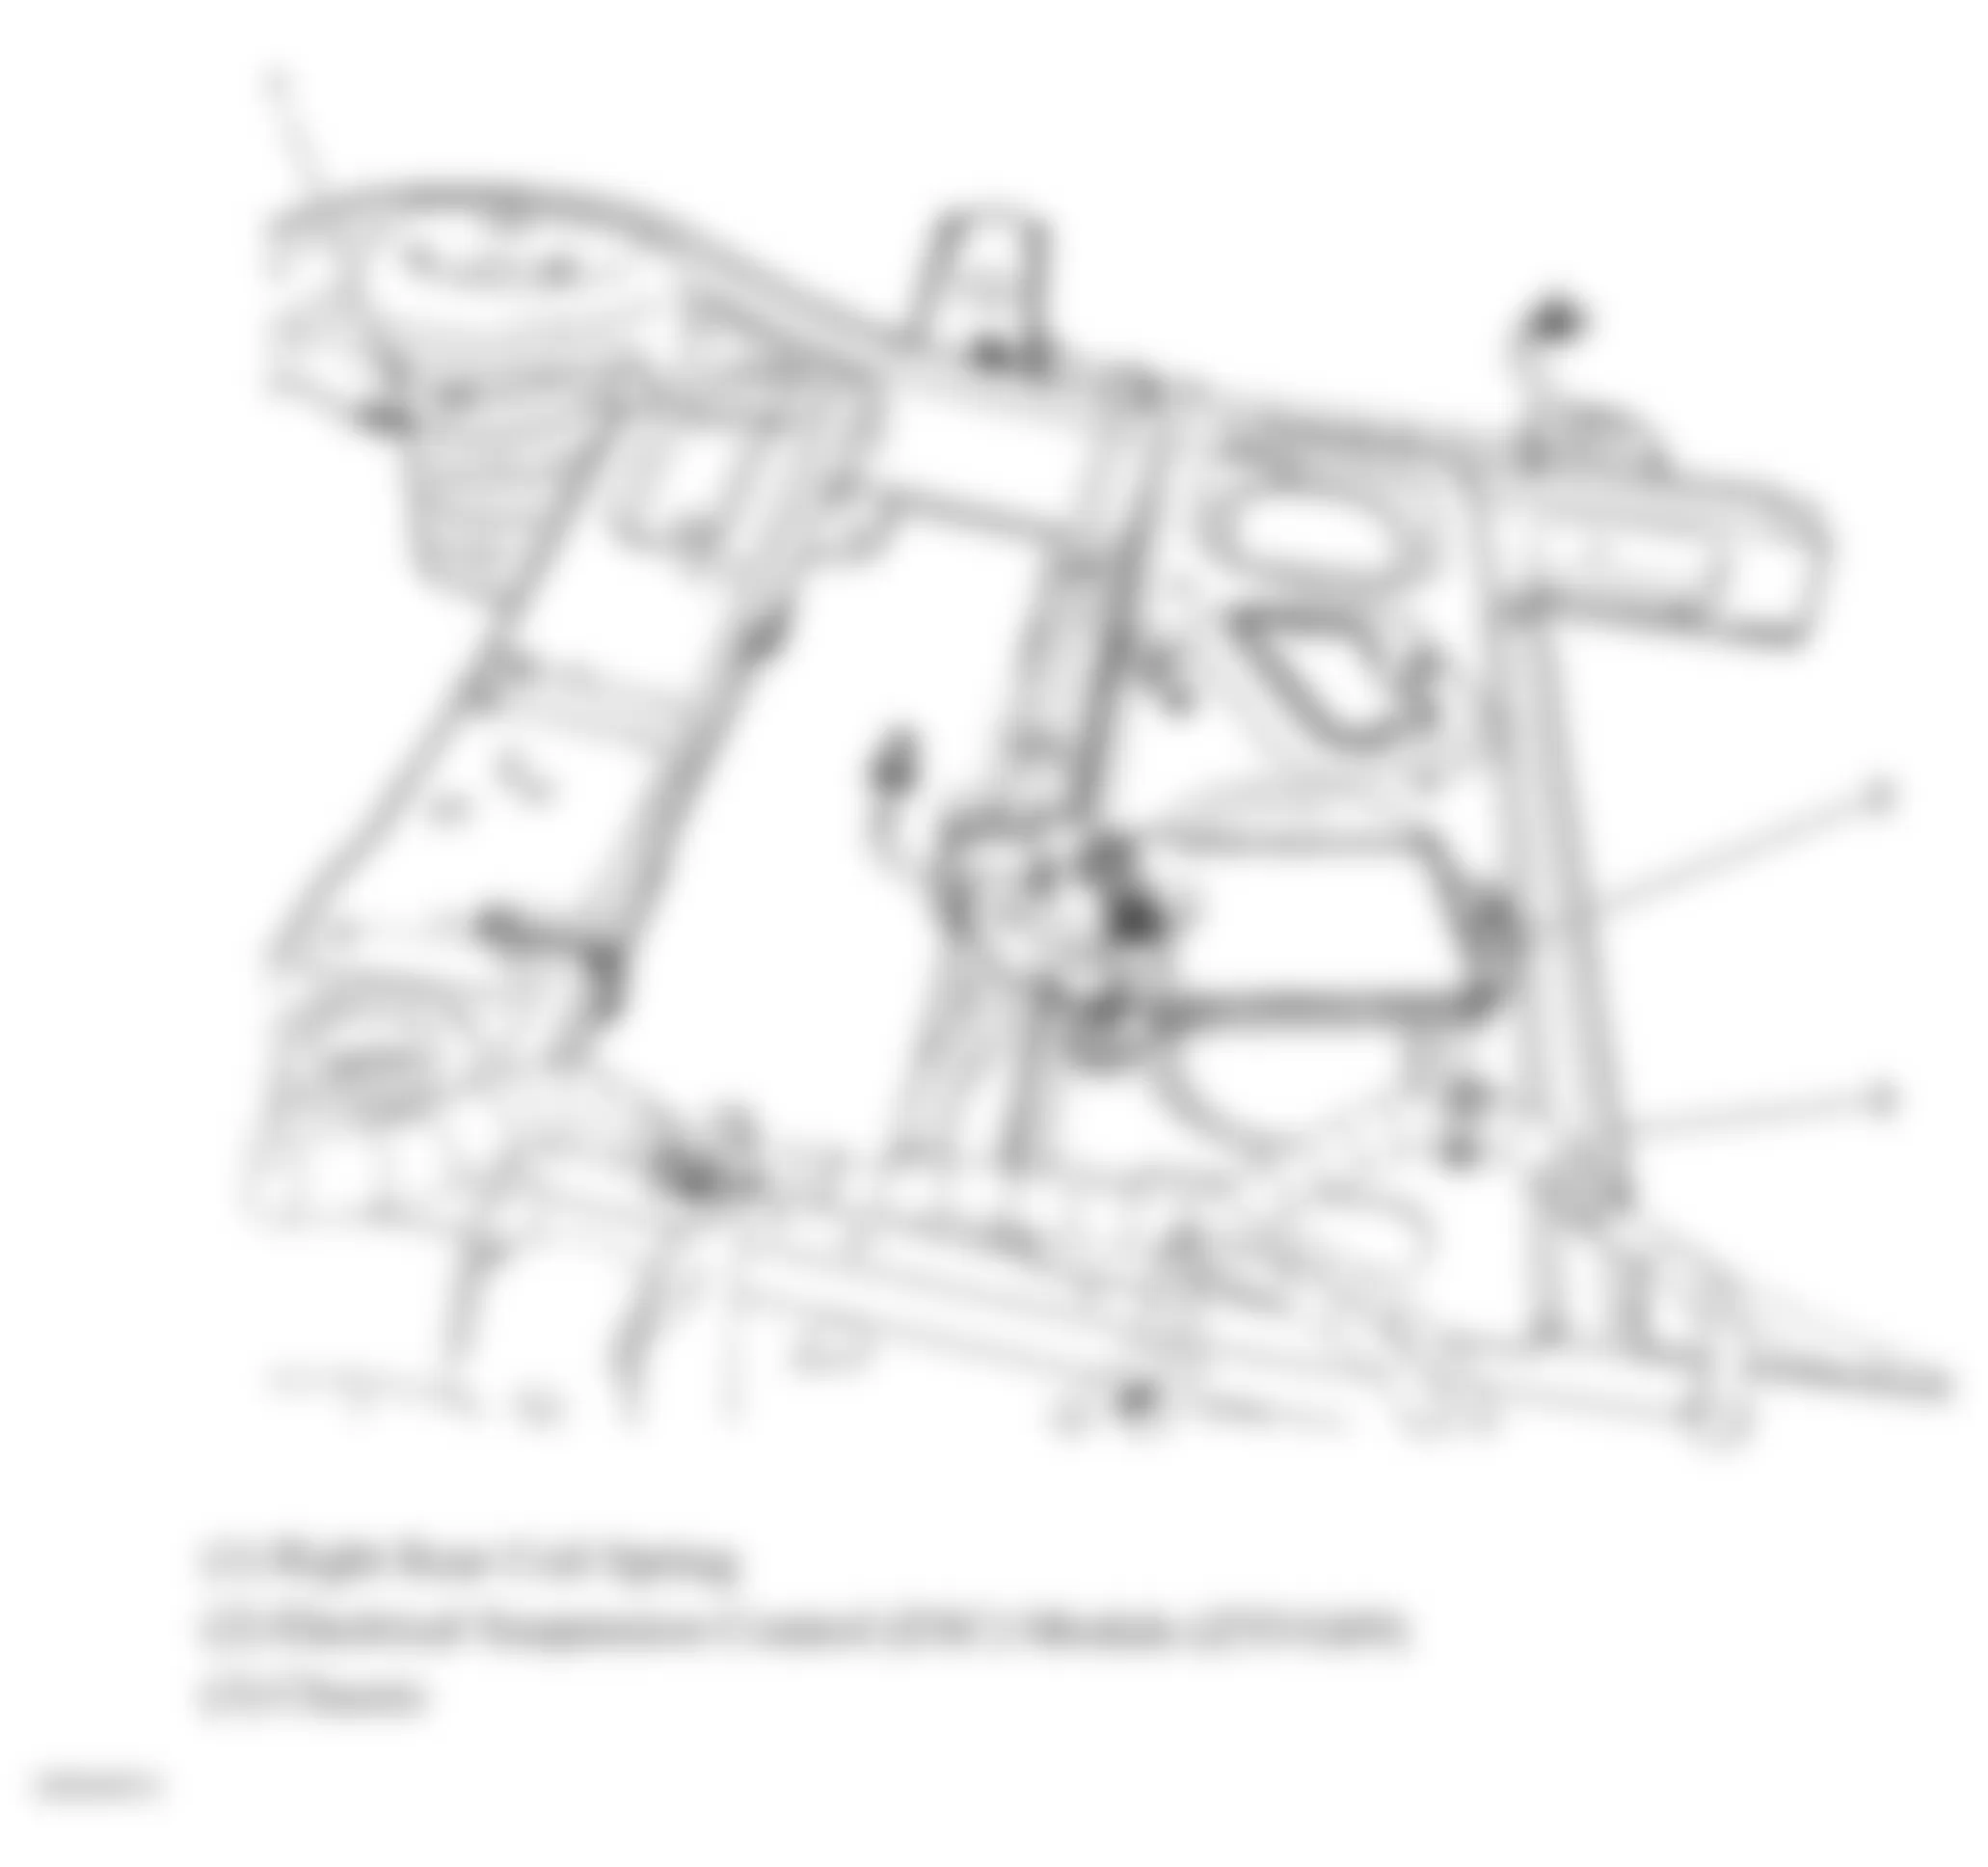 GMC Yukon XL K2500 2007 - Component Locations -  Rear Chassis